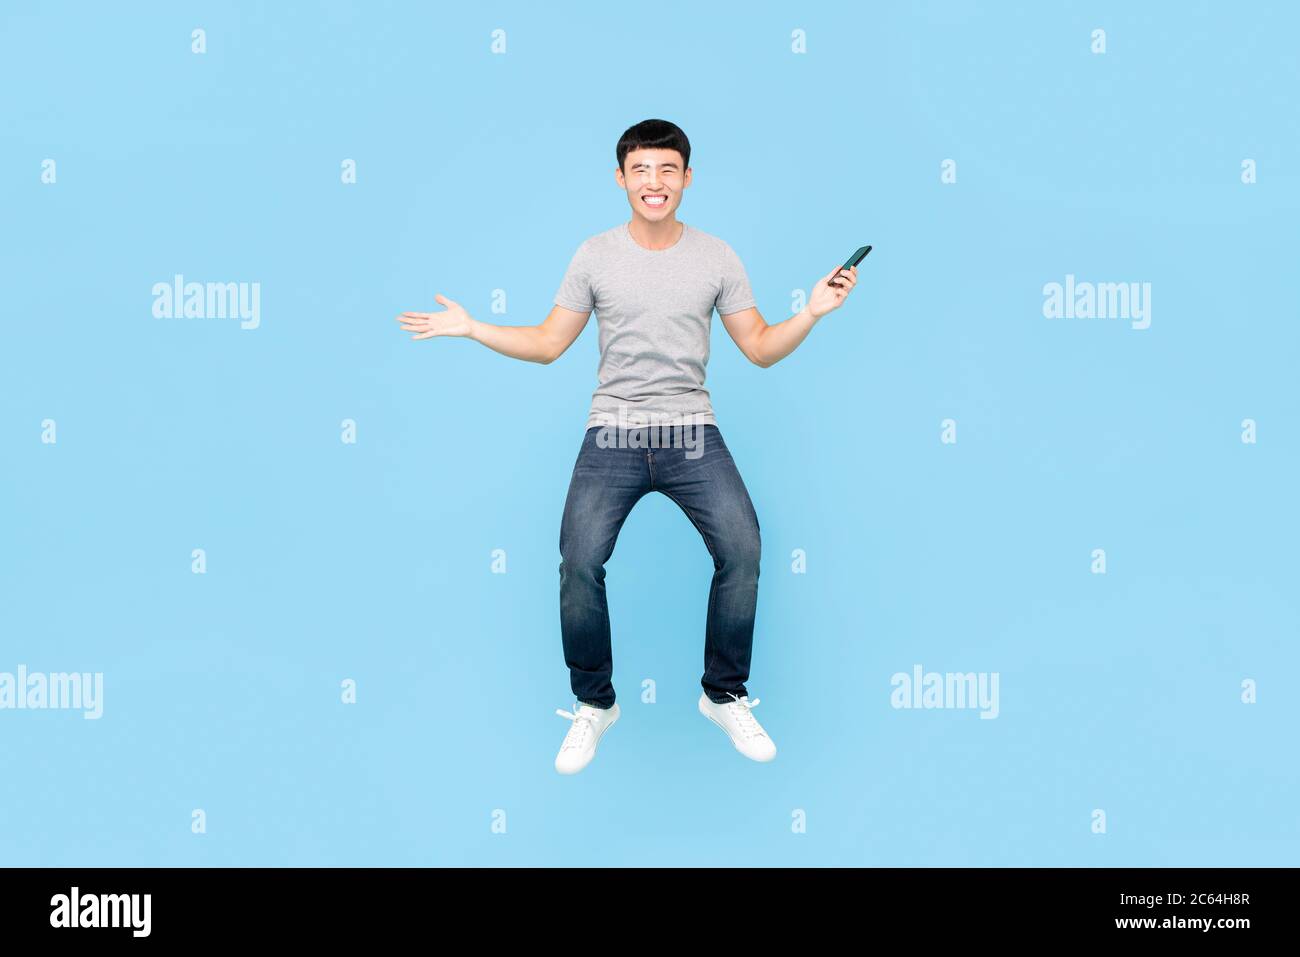 Fun full length portrait of happy smiling Asian man jumping in mid-air while holding smartphone in isolated studio blue background Stock Photo